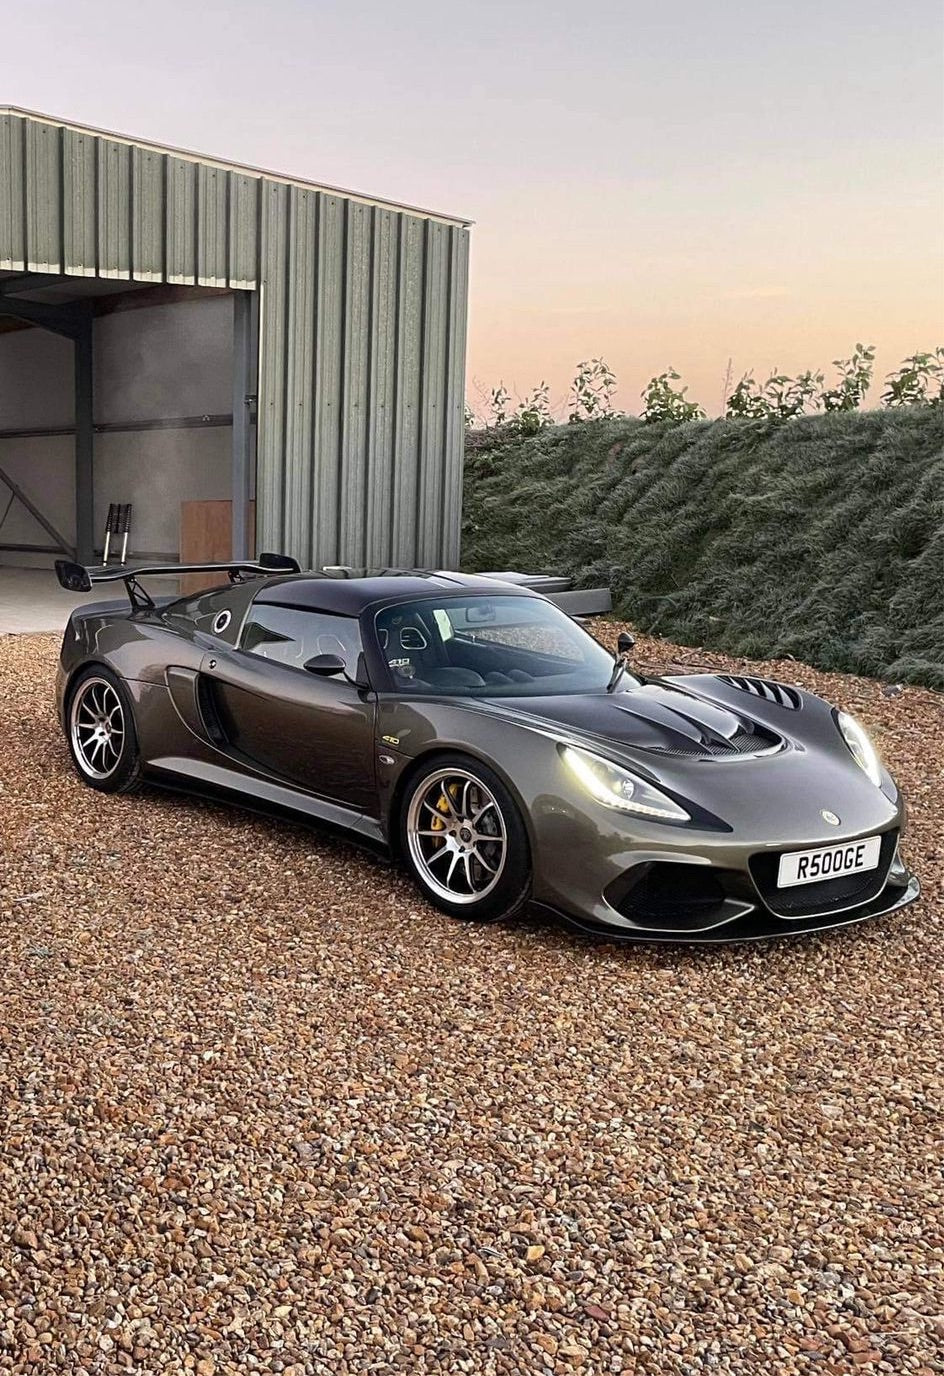 Exige Cup 430 forged alloy wheels finial edition diamond